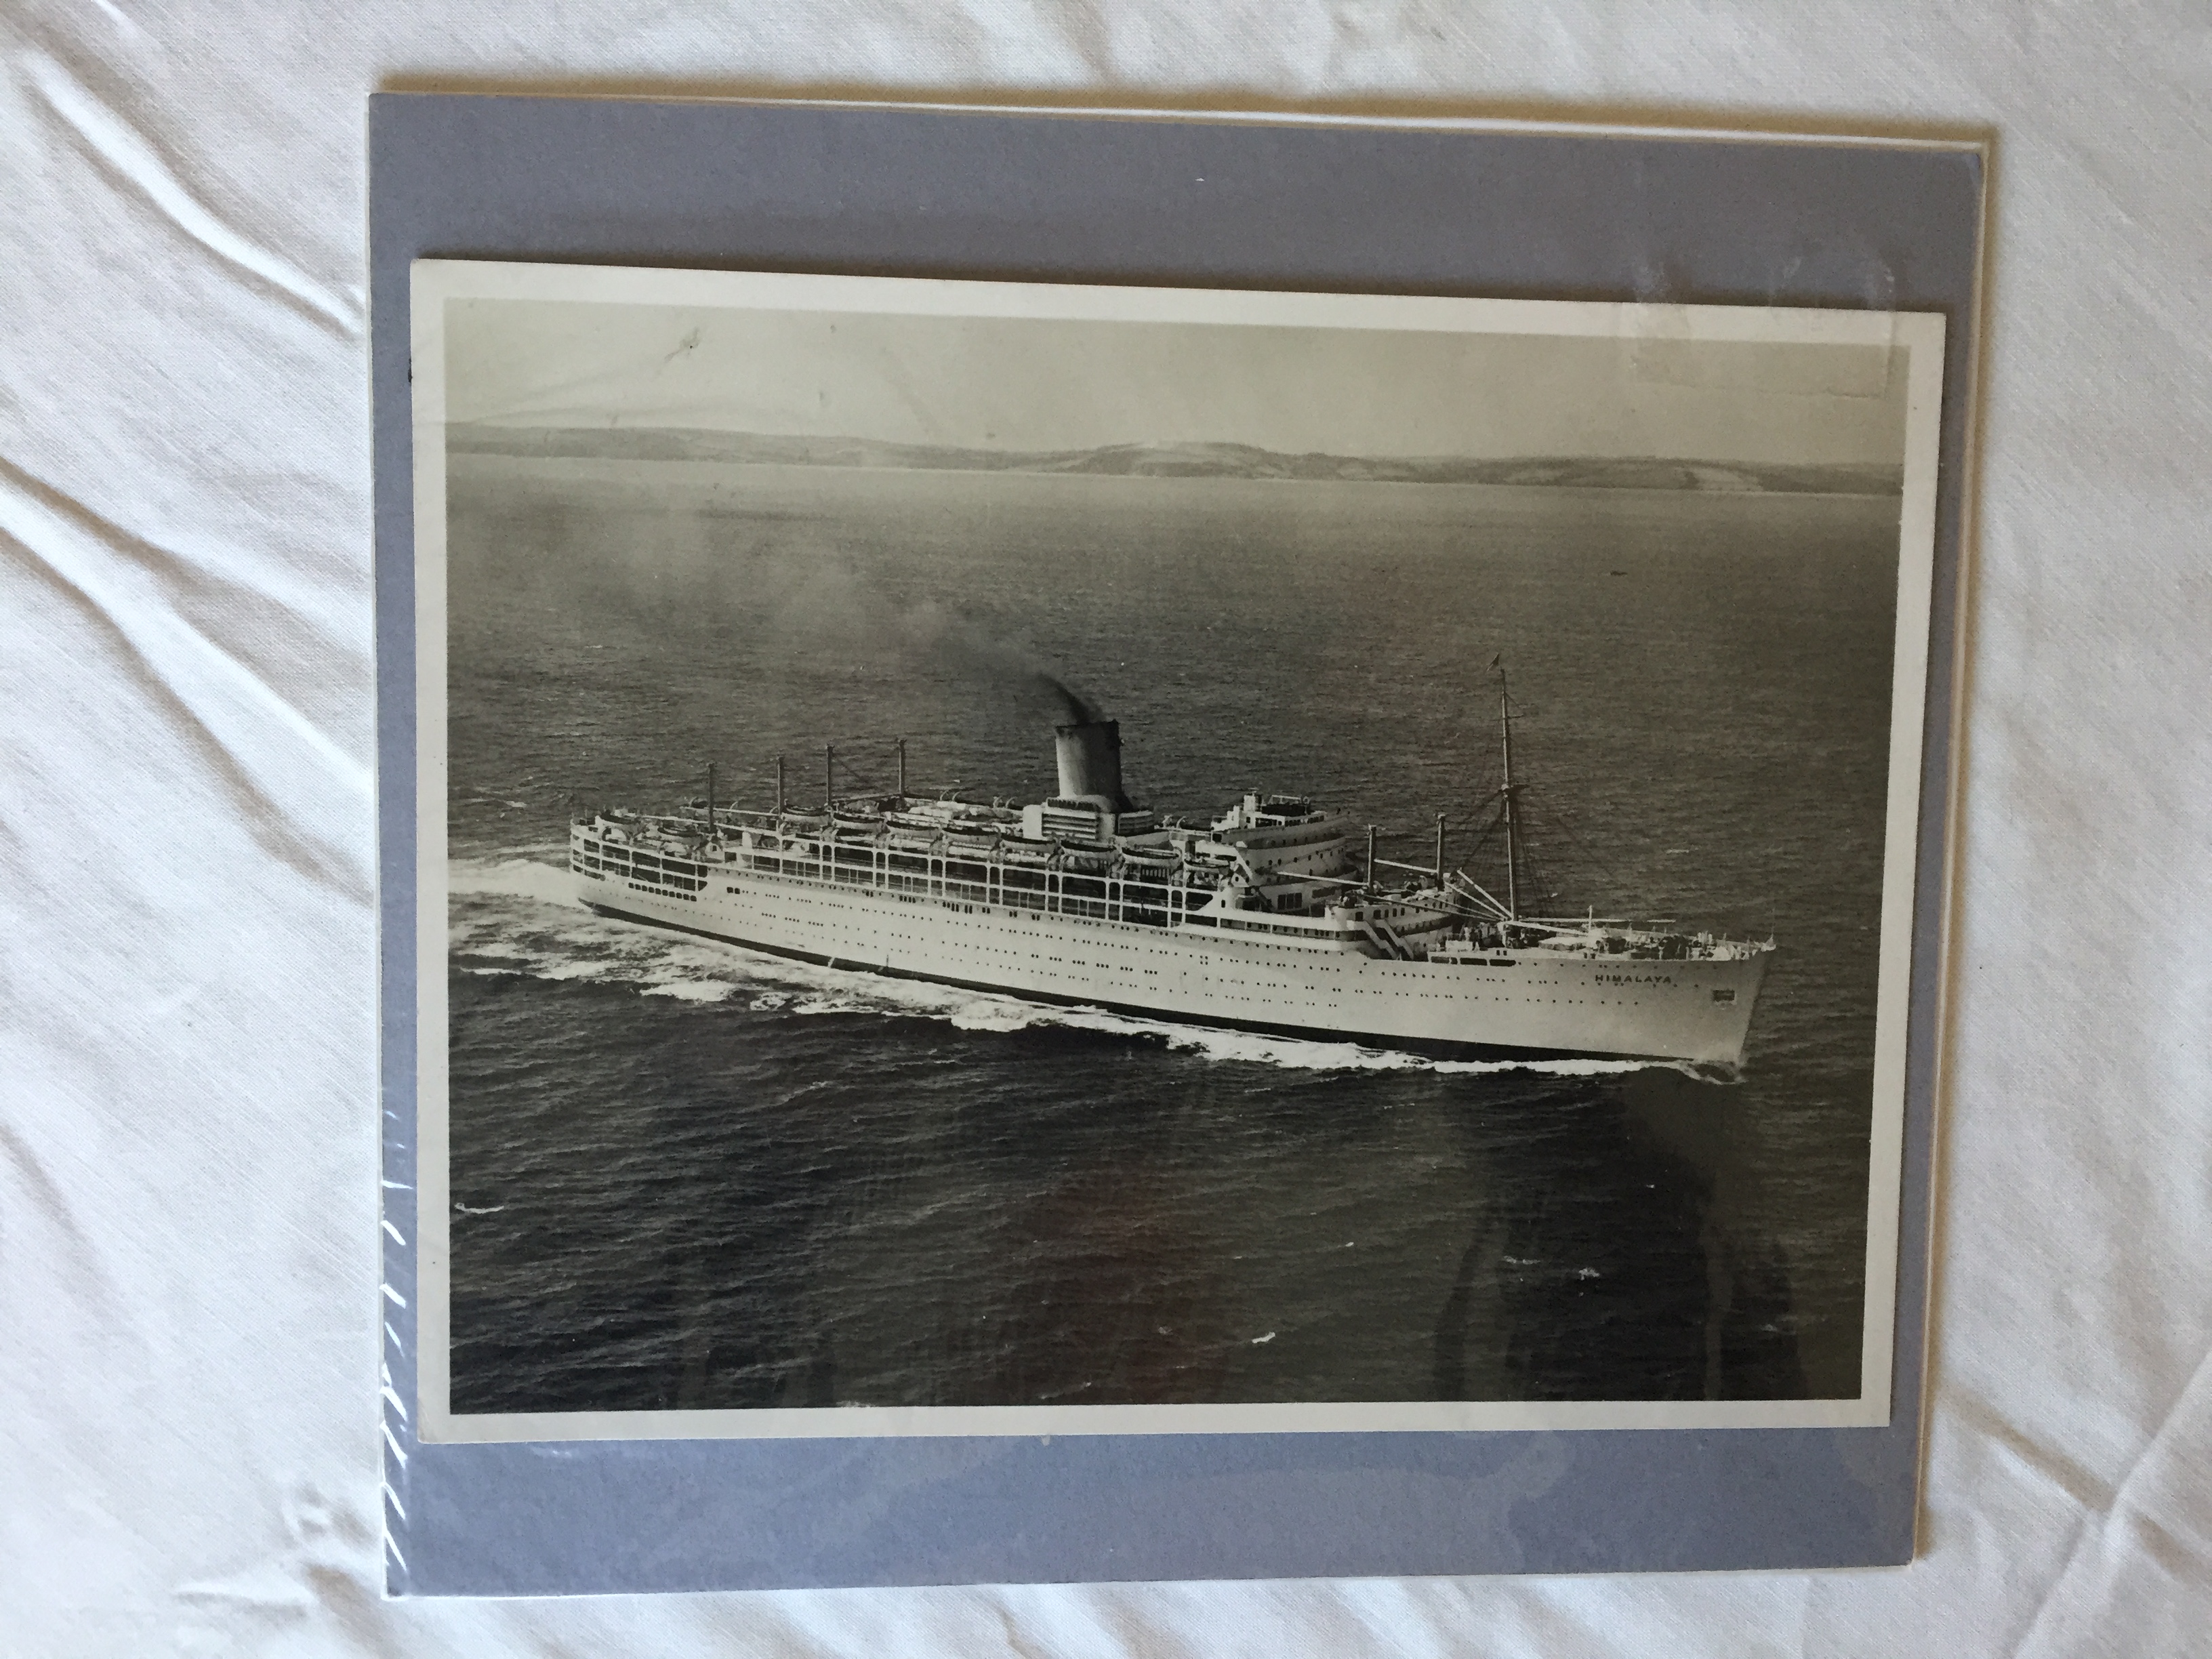 EARLY LARGE SIZE B/W PHOTOGRAPH OF THE P&O LINE VESSEL THE HIMALAYA